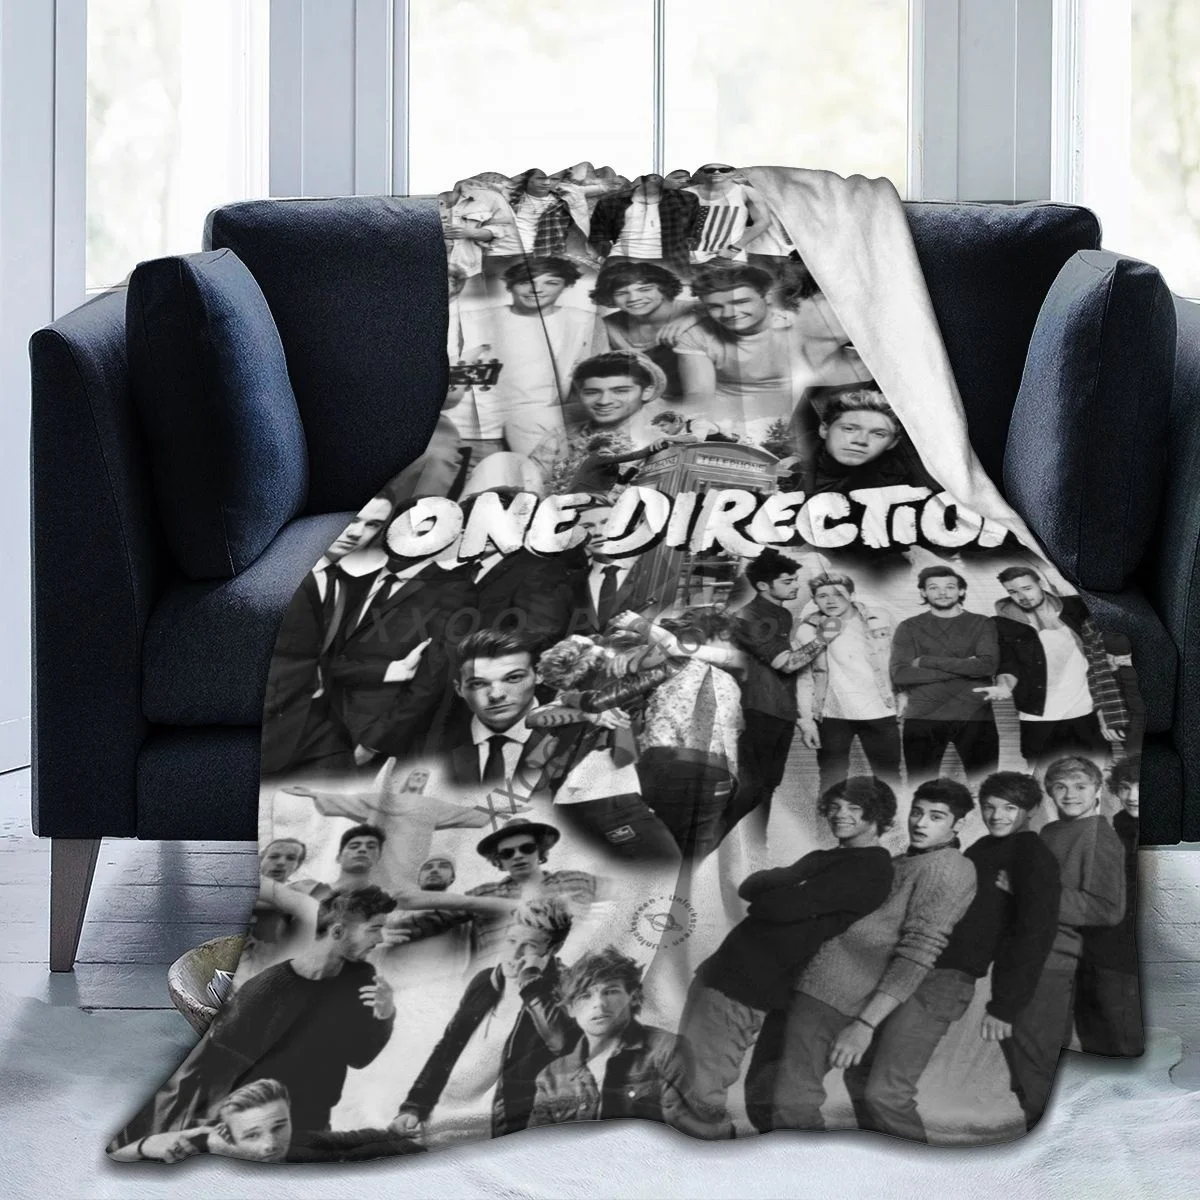 

Cozy One Direction Blanket Flannel Throw Blankets Micro Fleece Cozy Plush Covers for Bed Car and Home Decoration